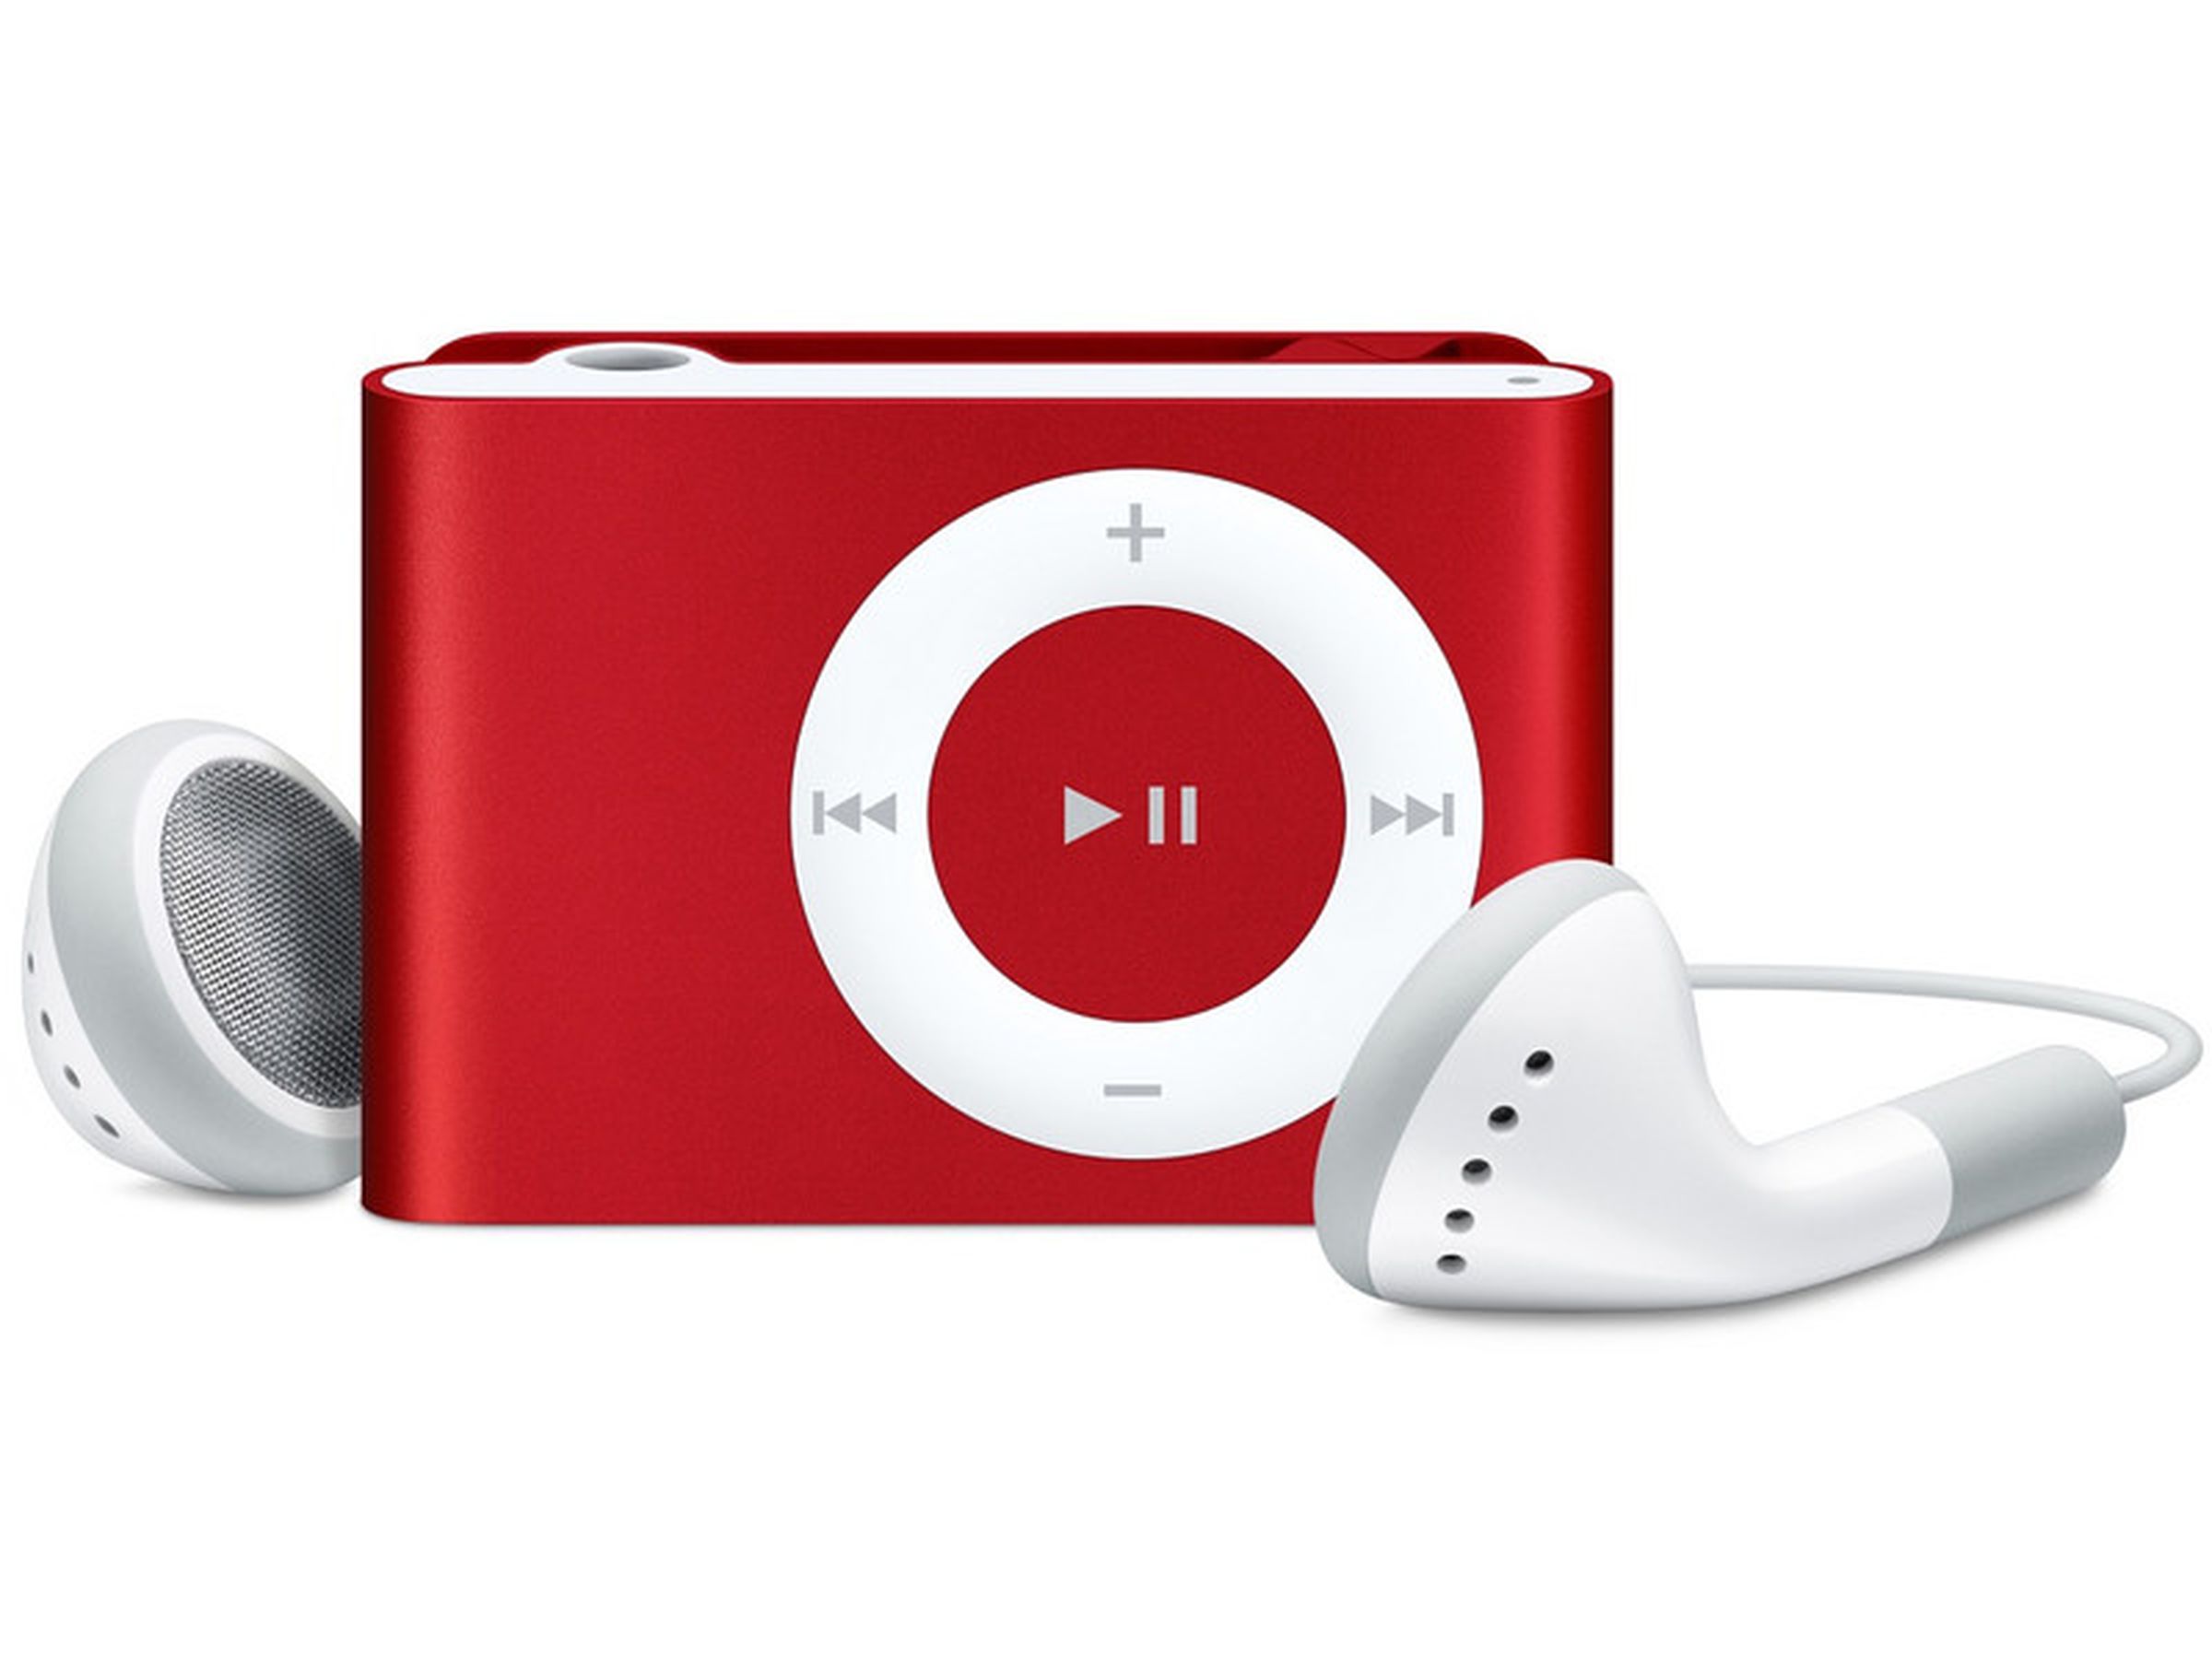 Apple's contributions to Product Red